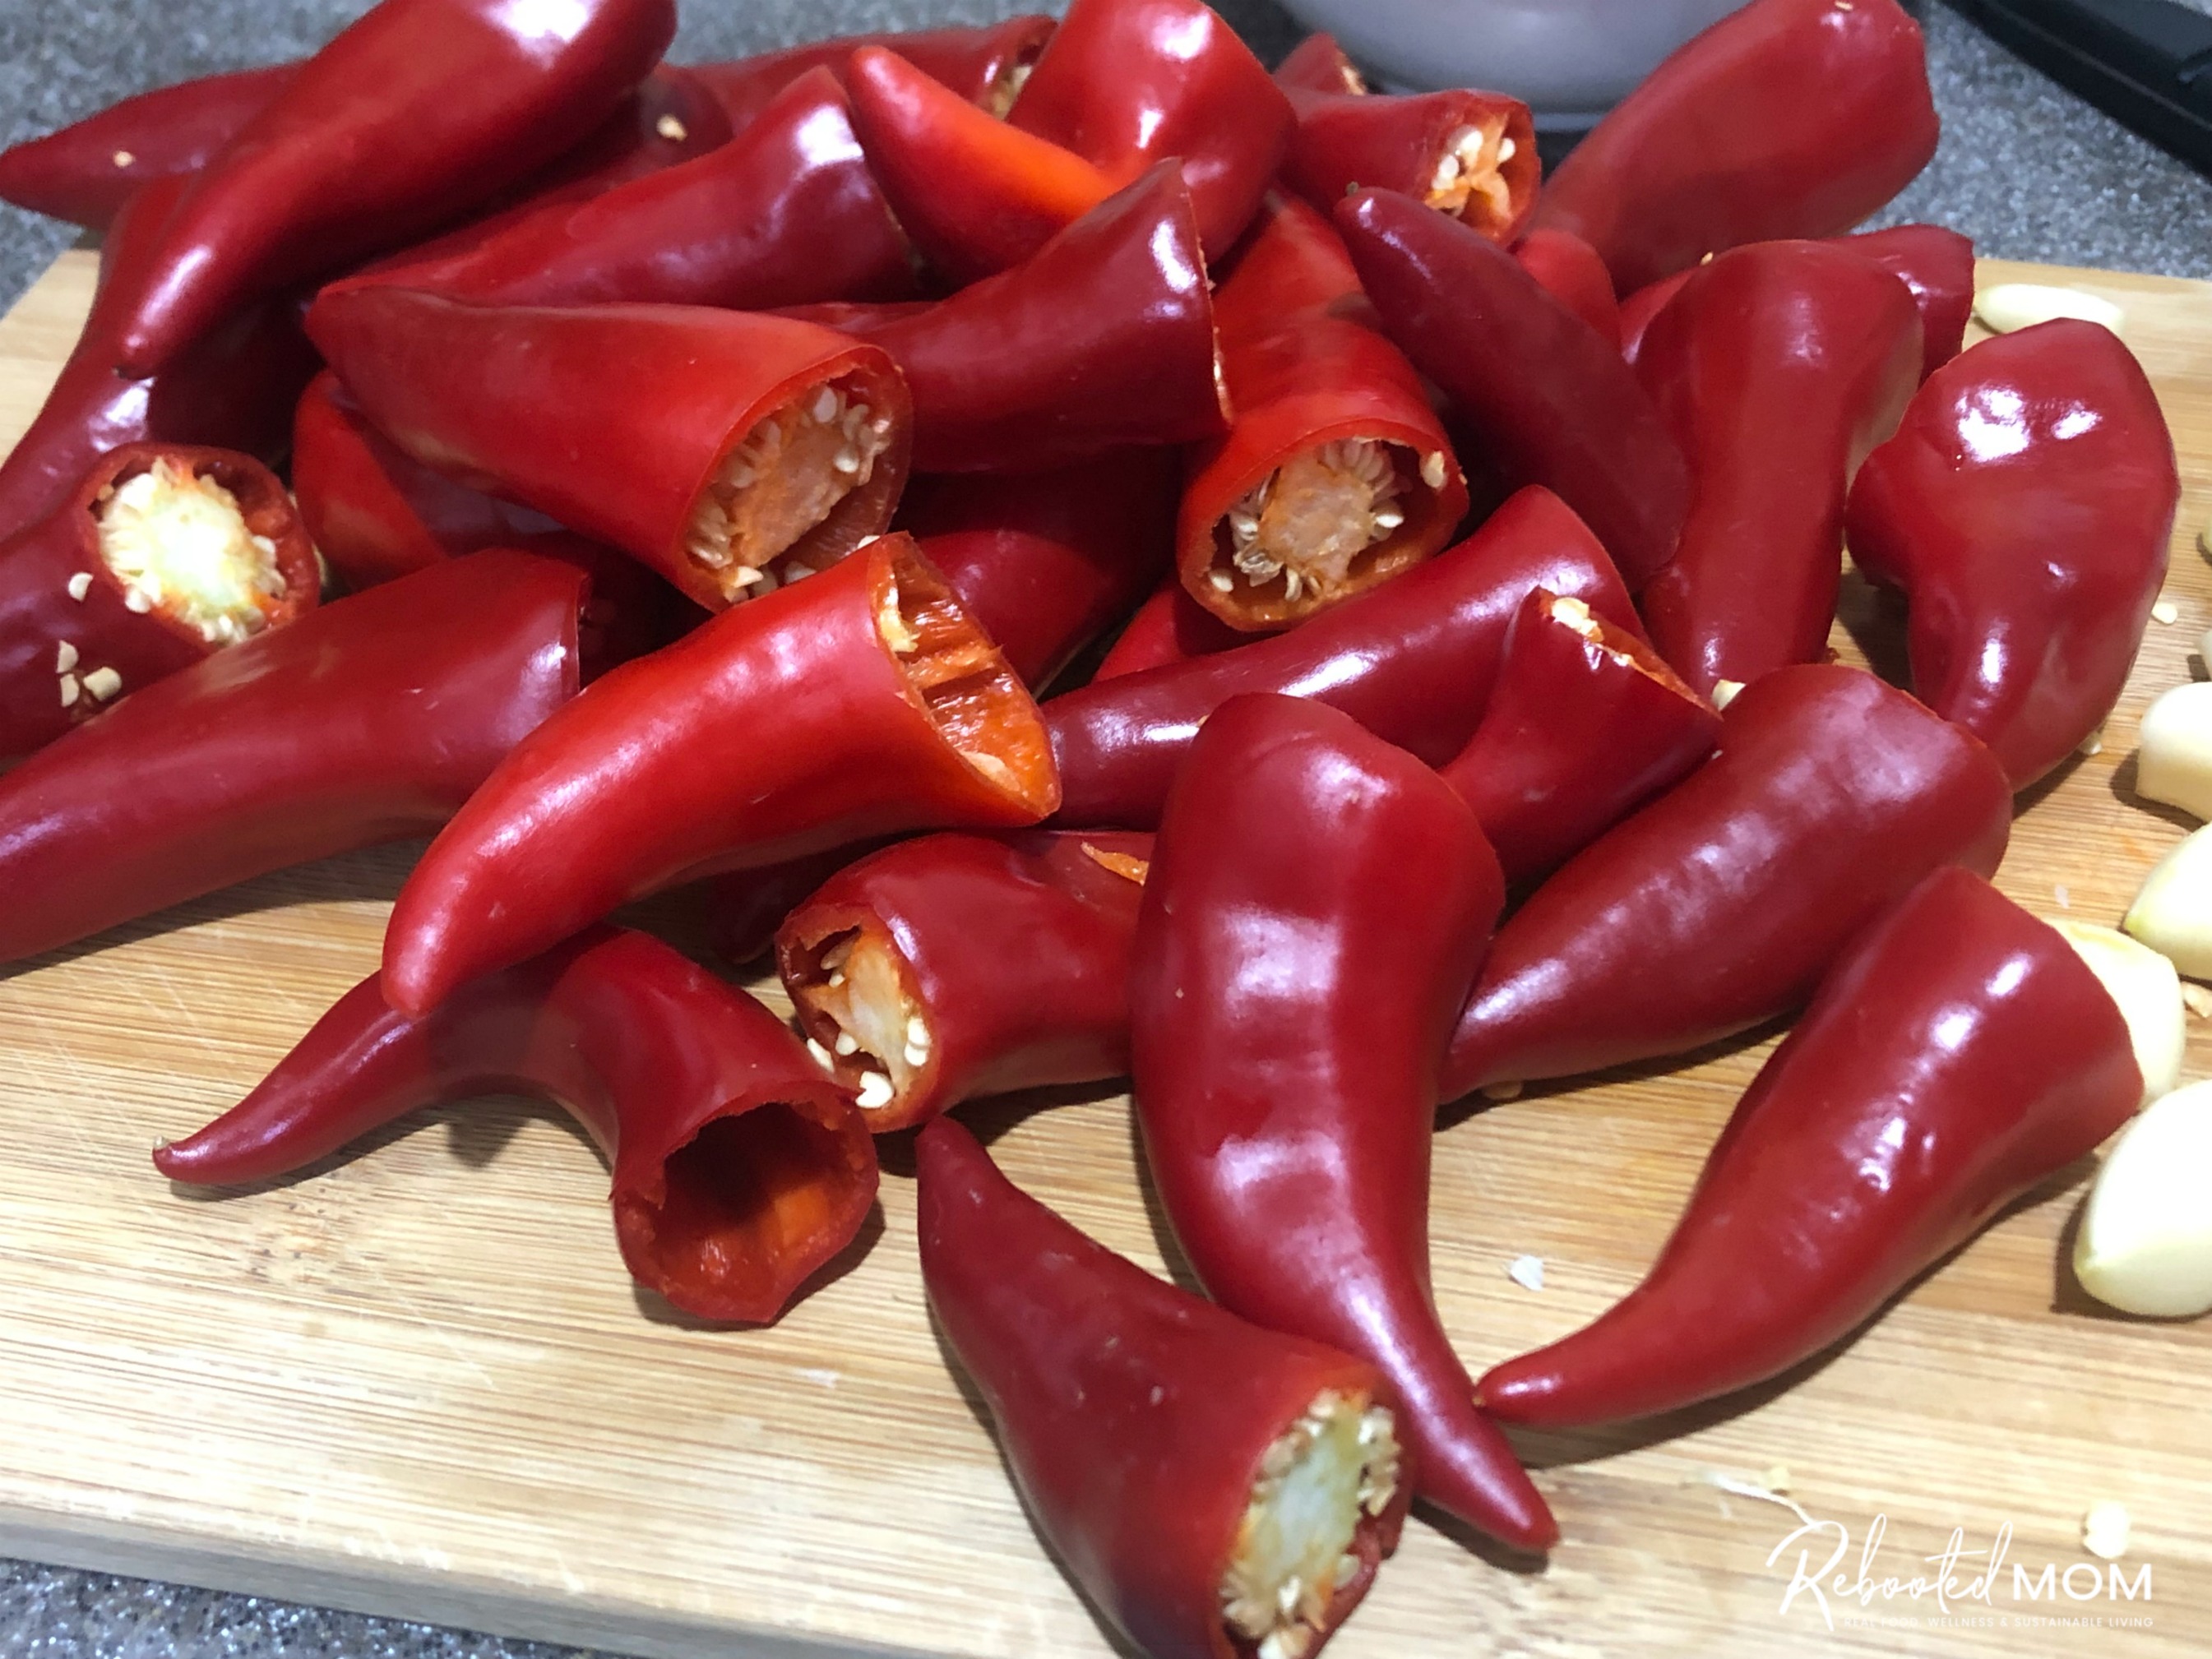 Fresno Chile peppers on a cutting board